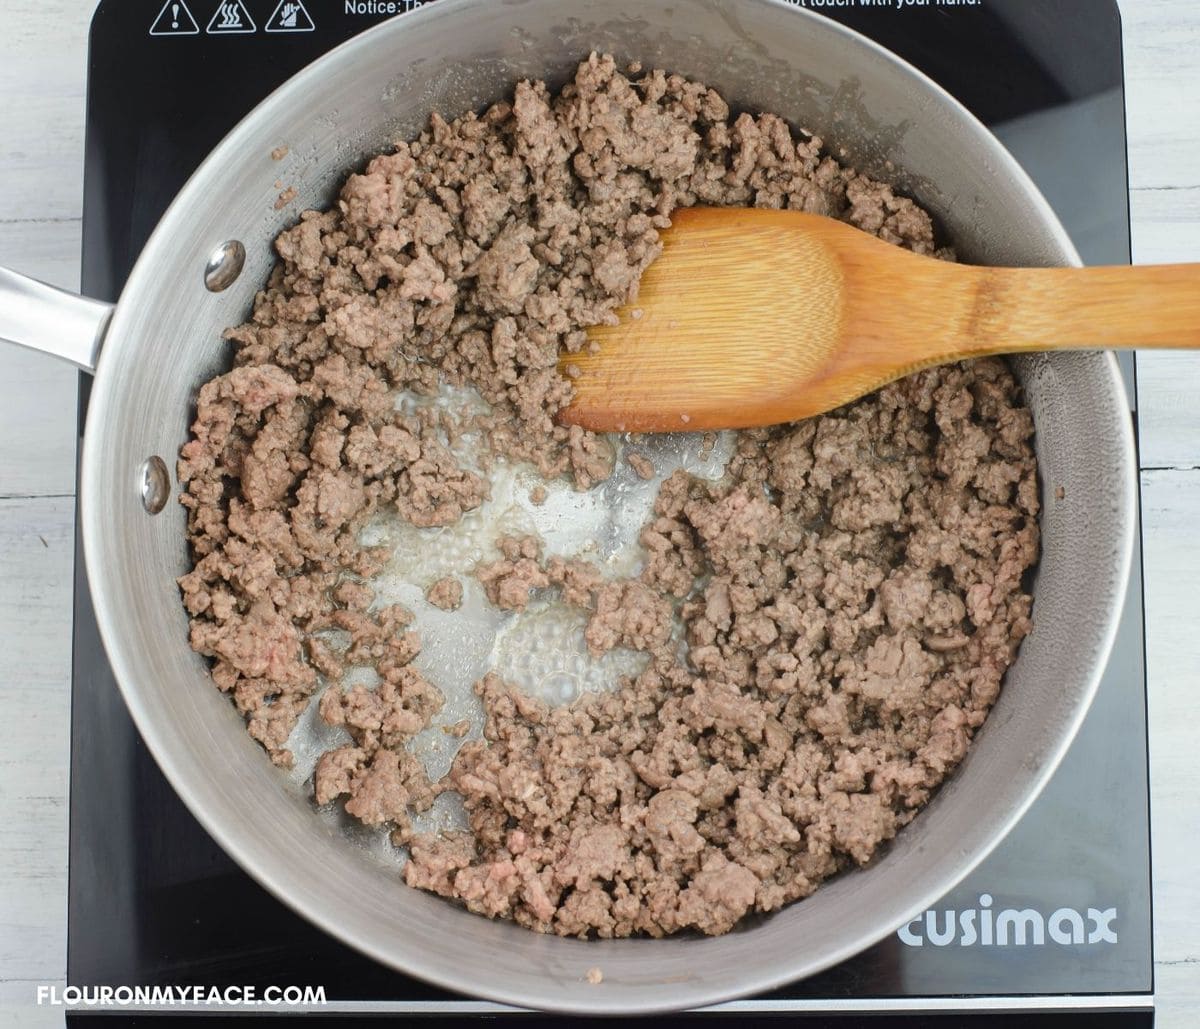 Browning ground beef for homemade pasta sauce in a skillet.